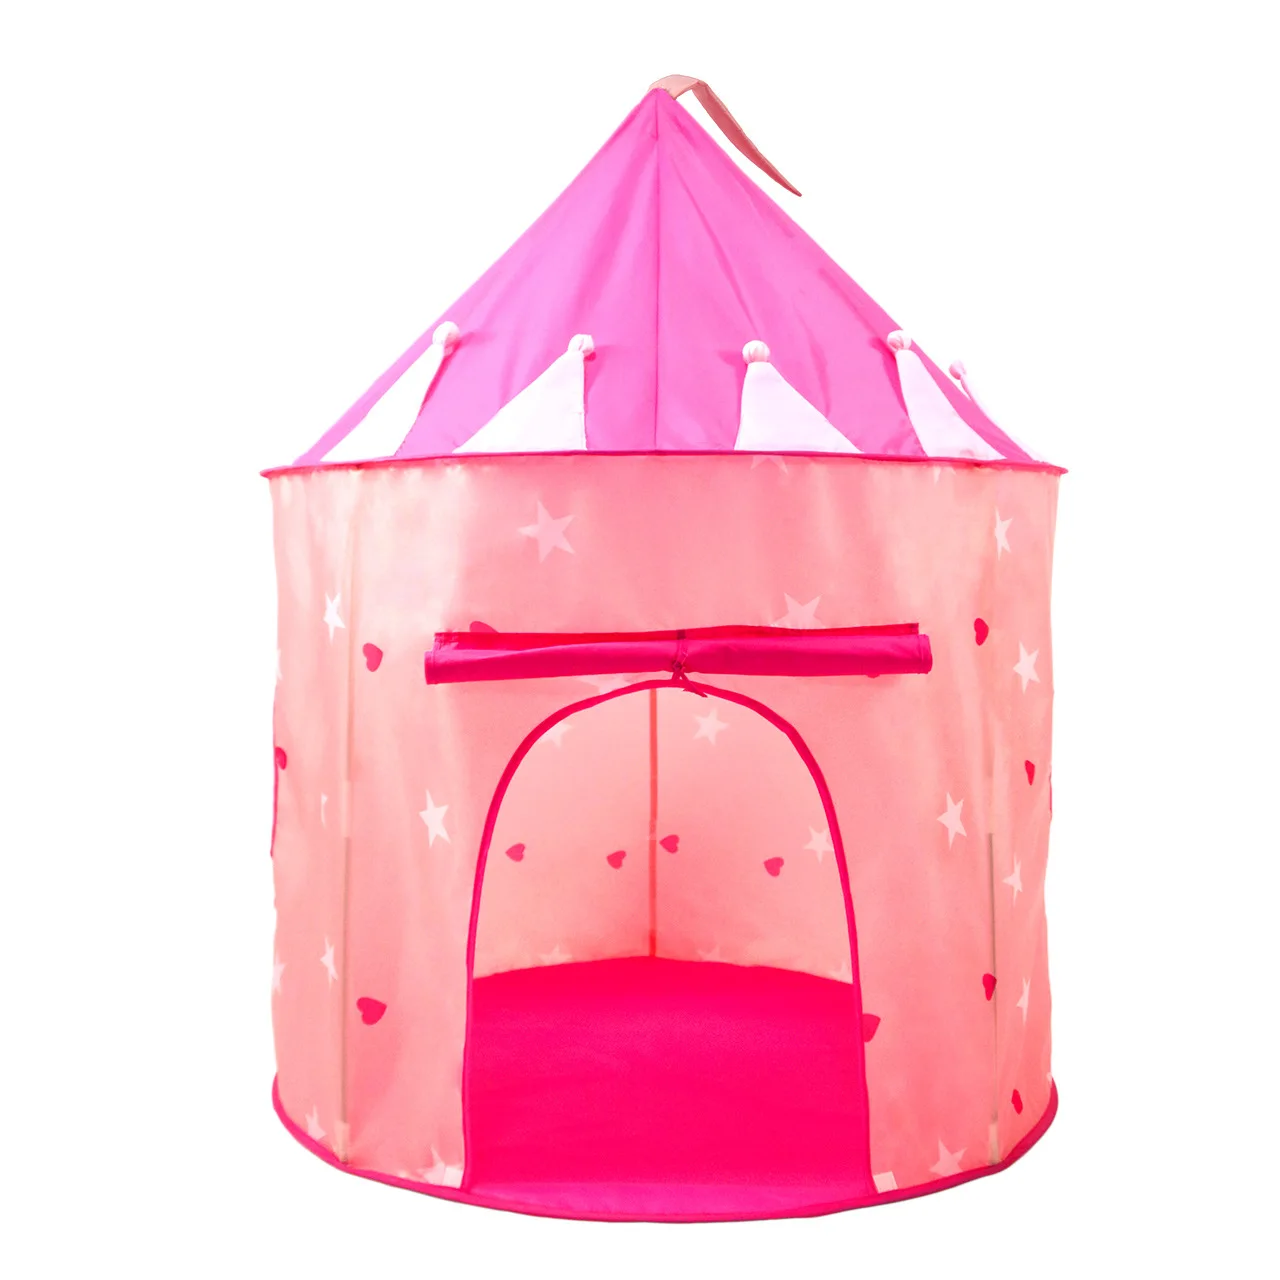 Stars Grow in Dark Princess Castle Kids Playhouse Tent Pop Up Kids Play Tent Foldable Pop Up  For Indoor and Outdoor Use